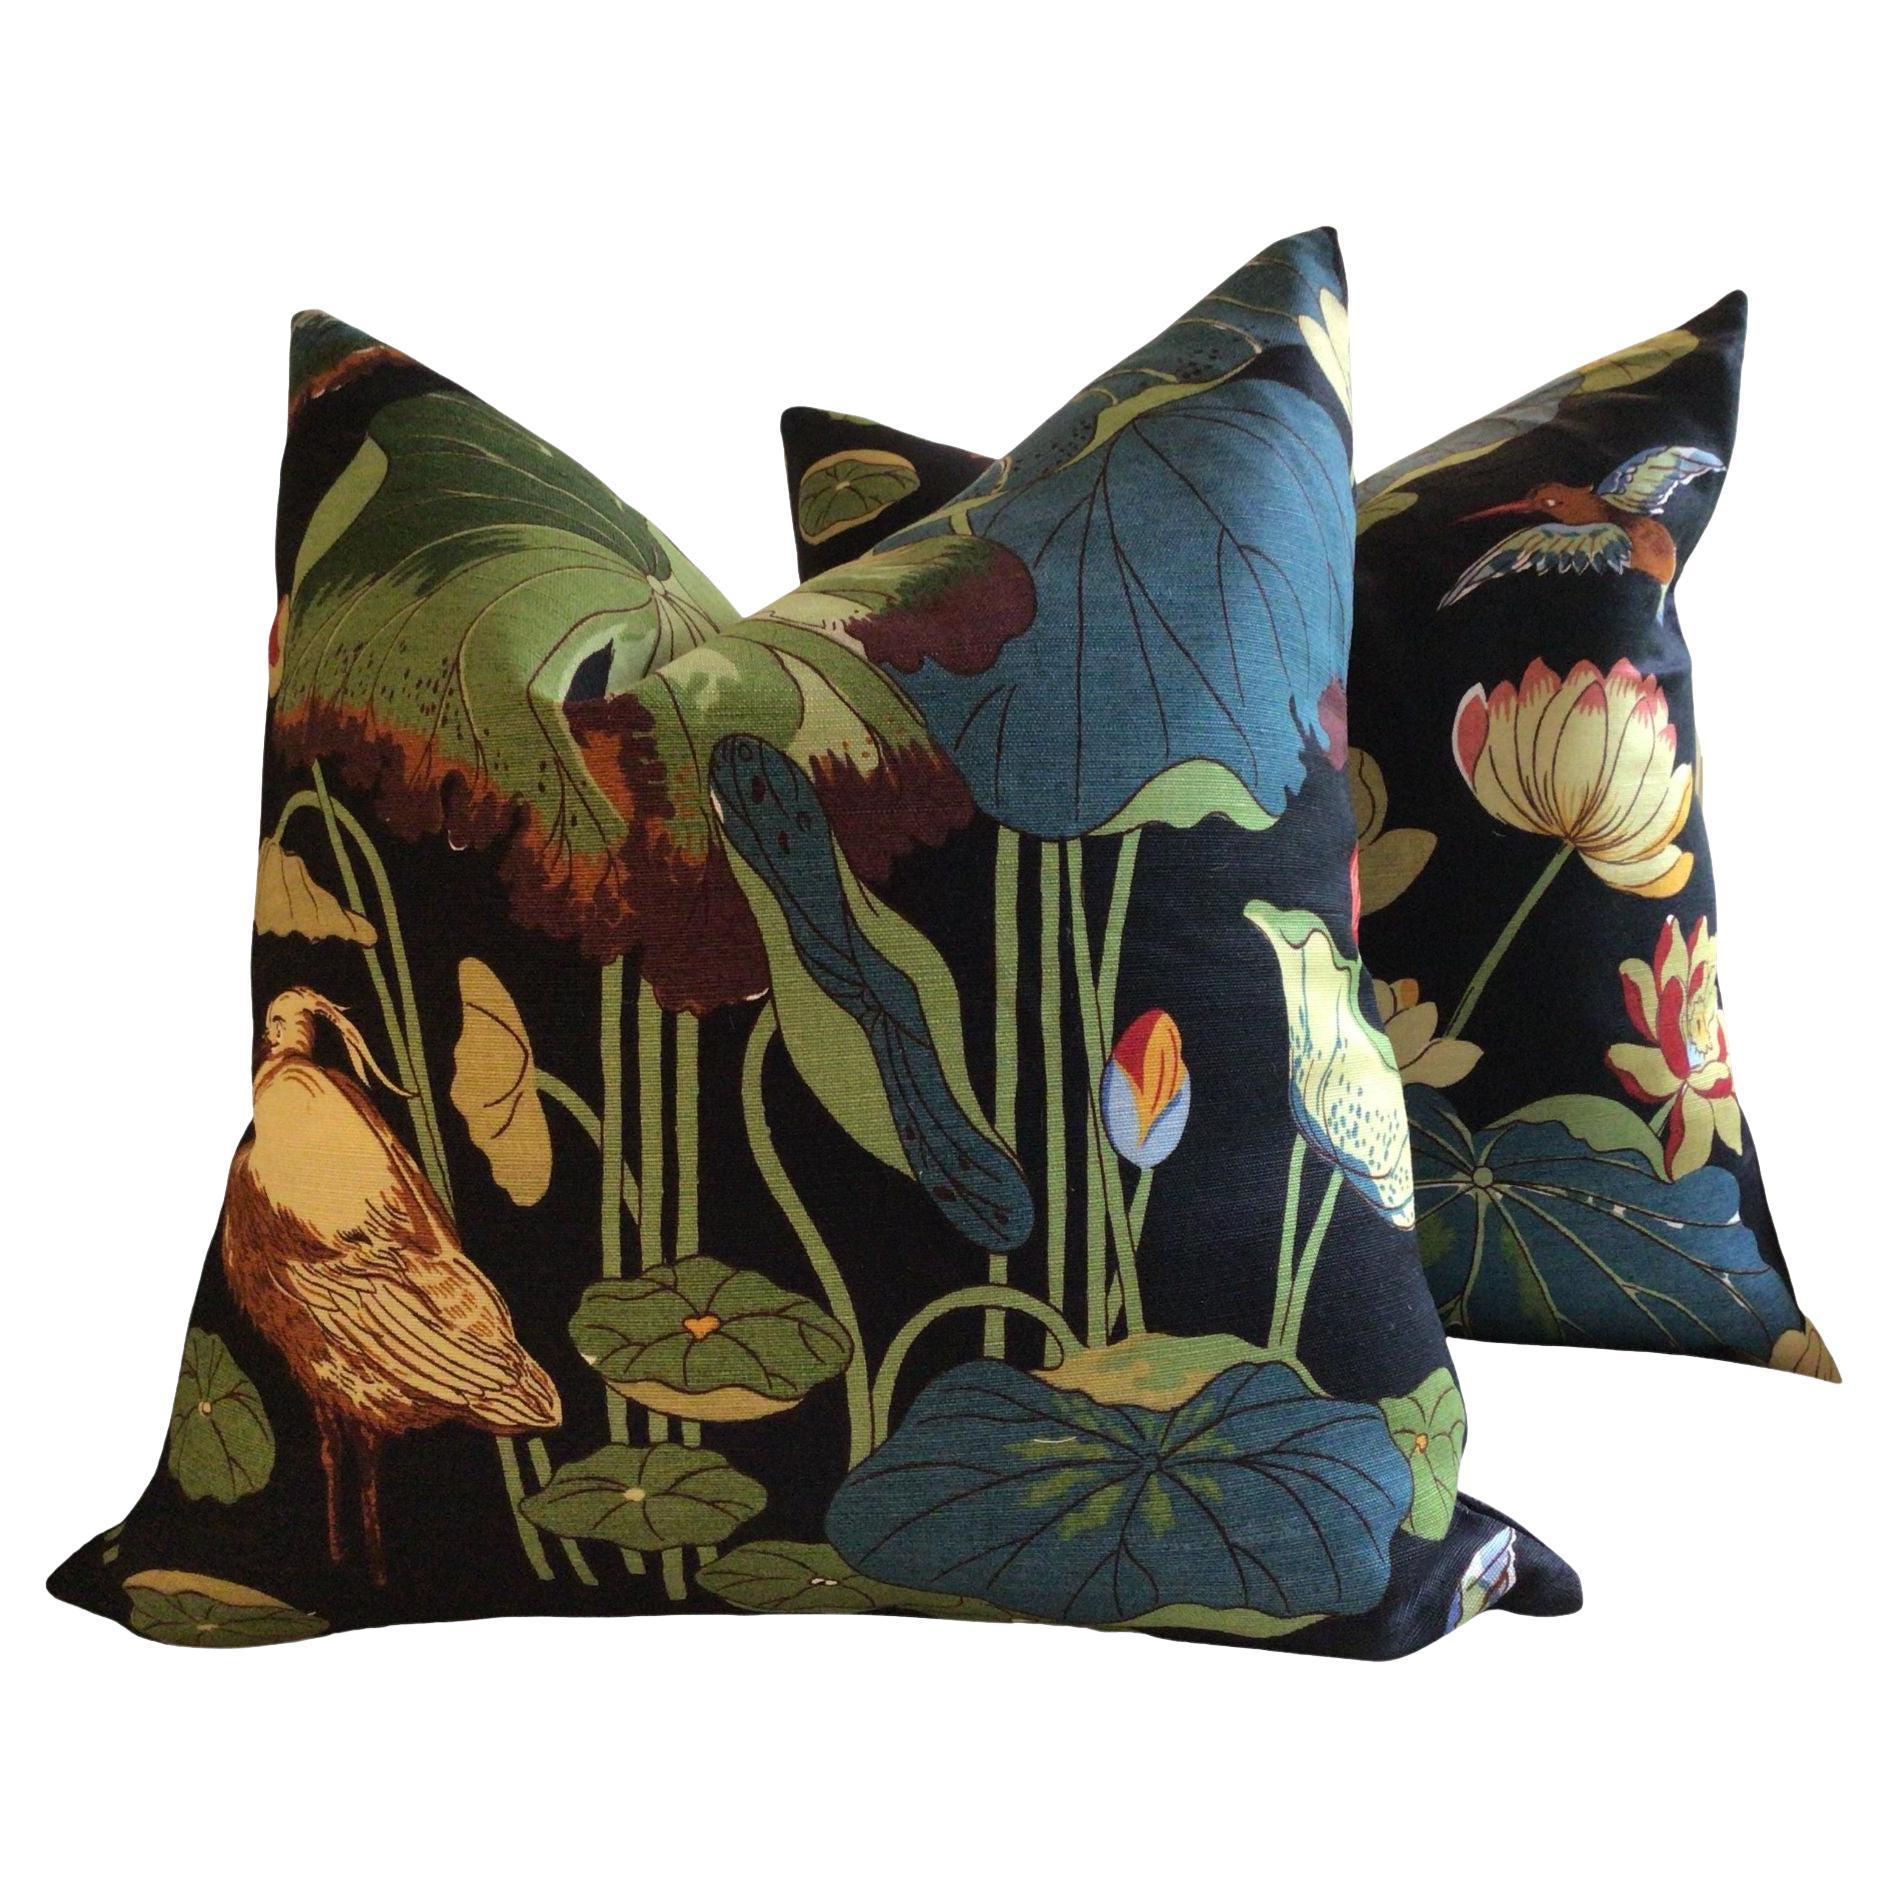 Gp and J Baker “Nympheus” Down-Filled Pillows - a Pair For Sale